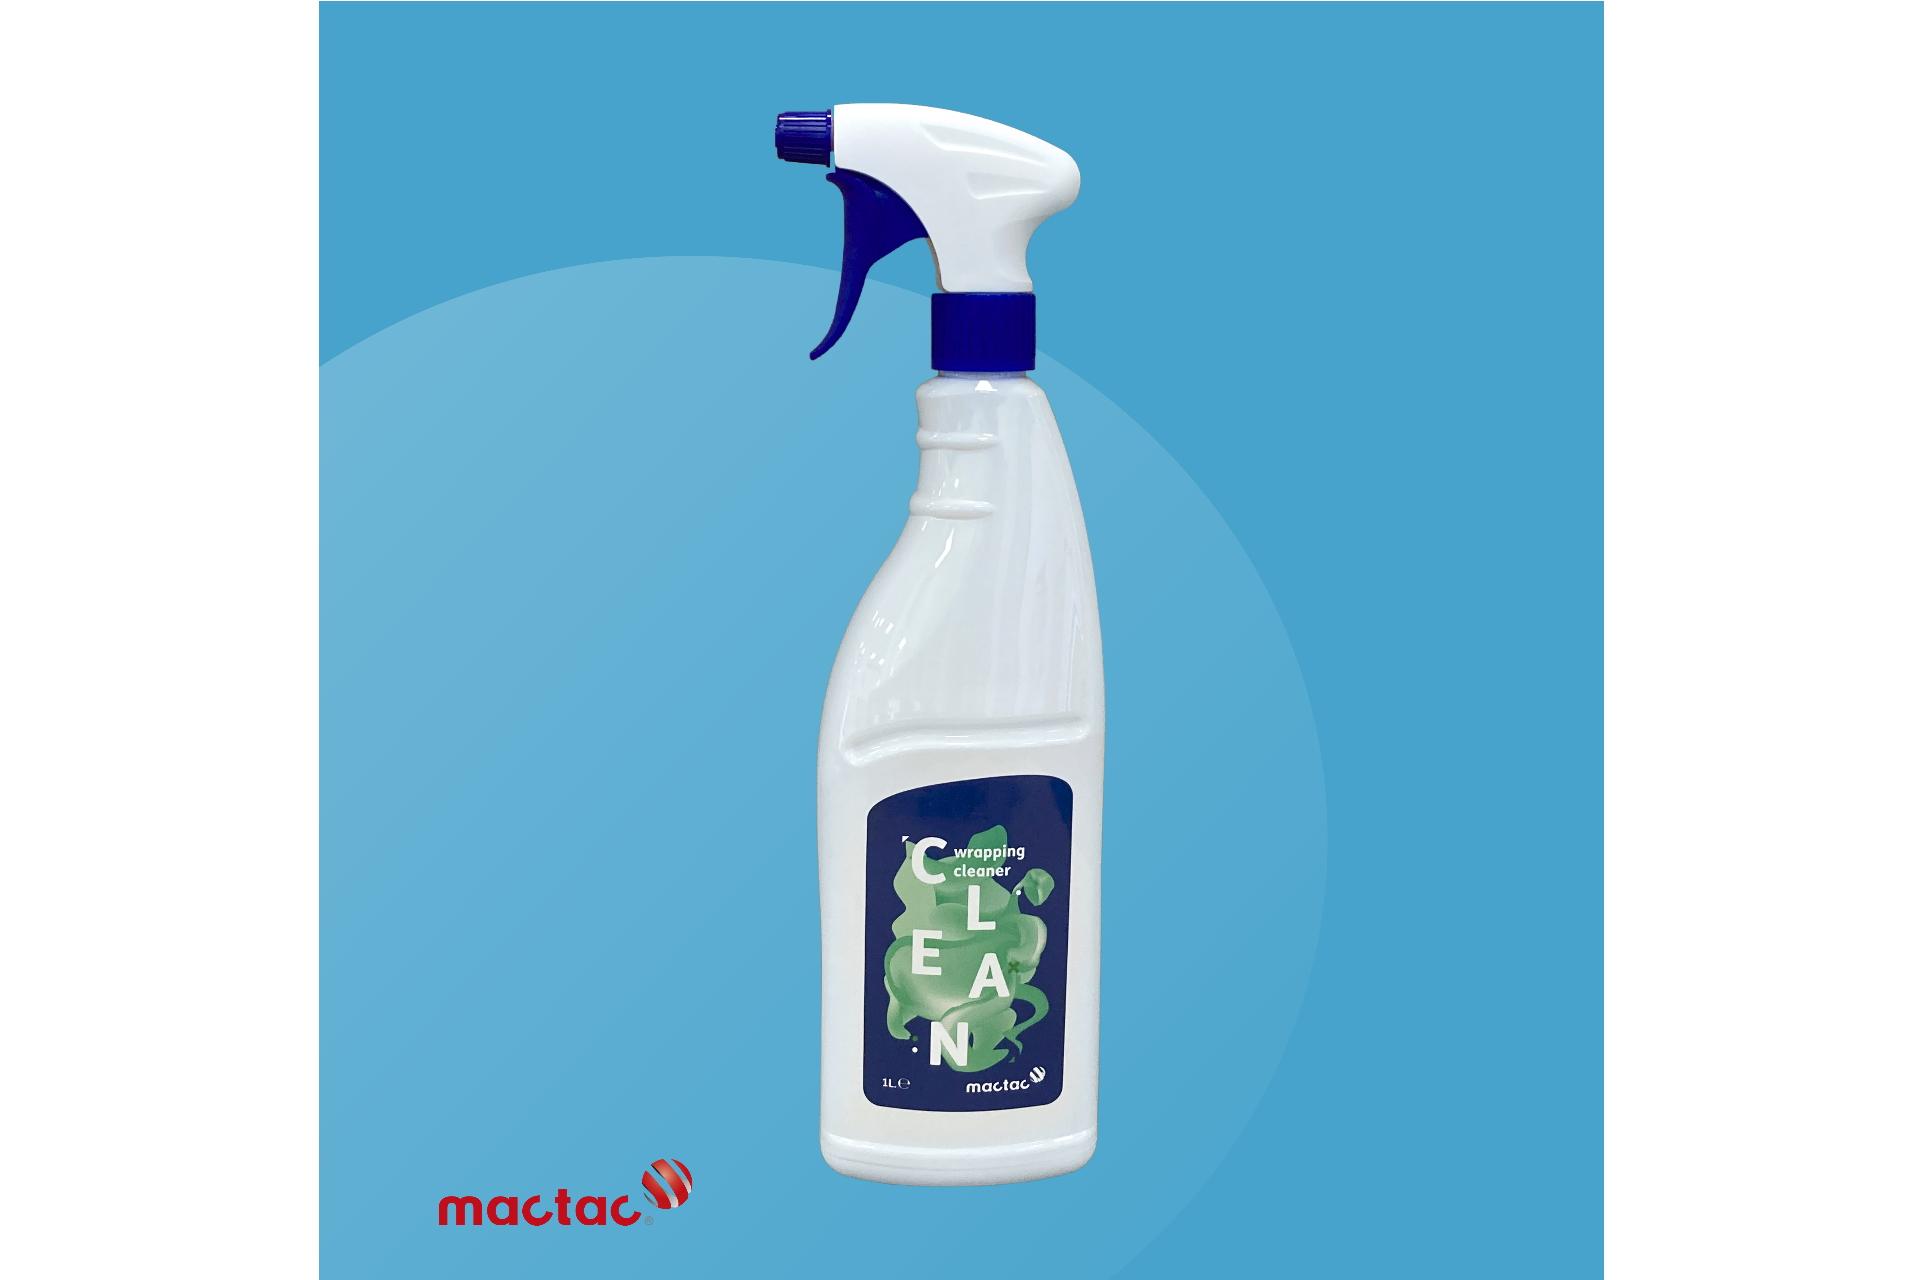 Foto: Mactac Wrapping Cleaner - 1 ltr.